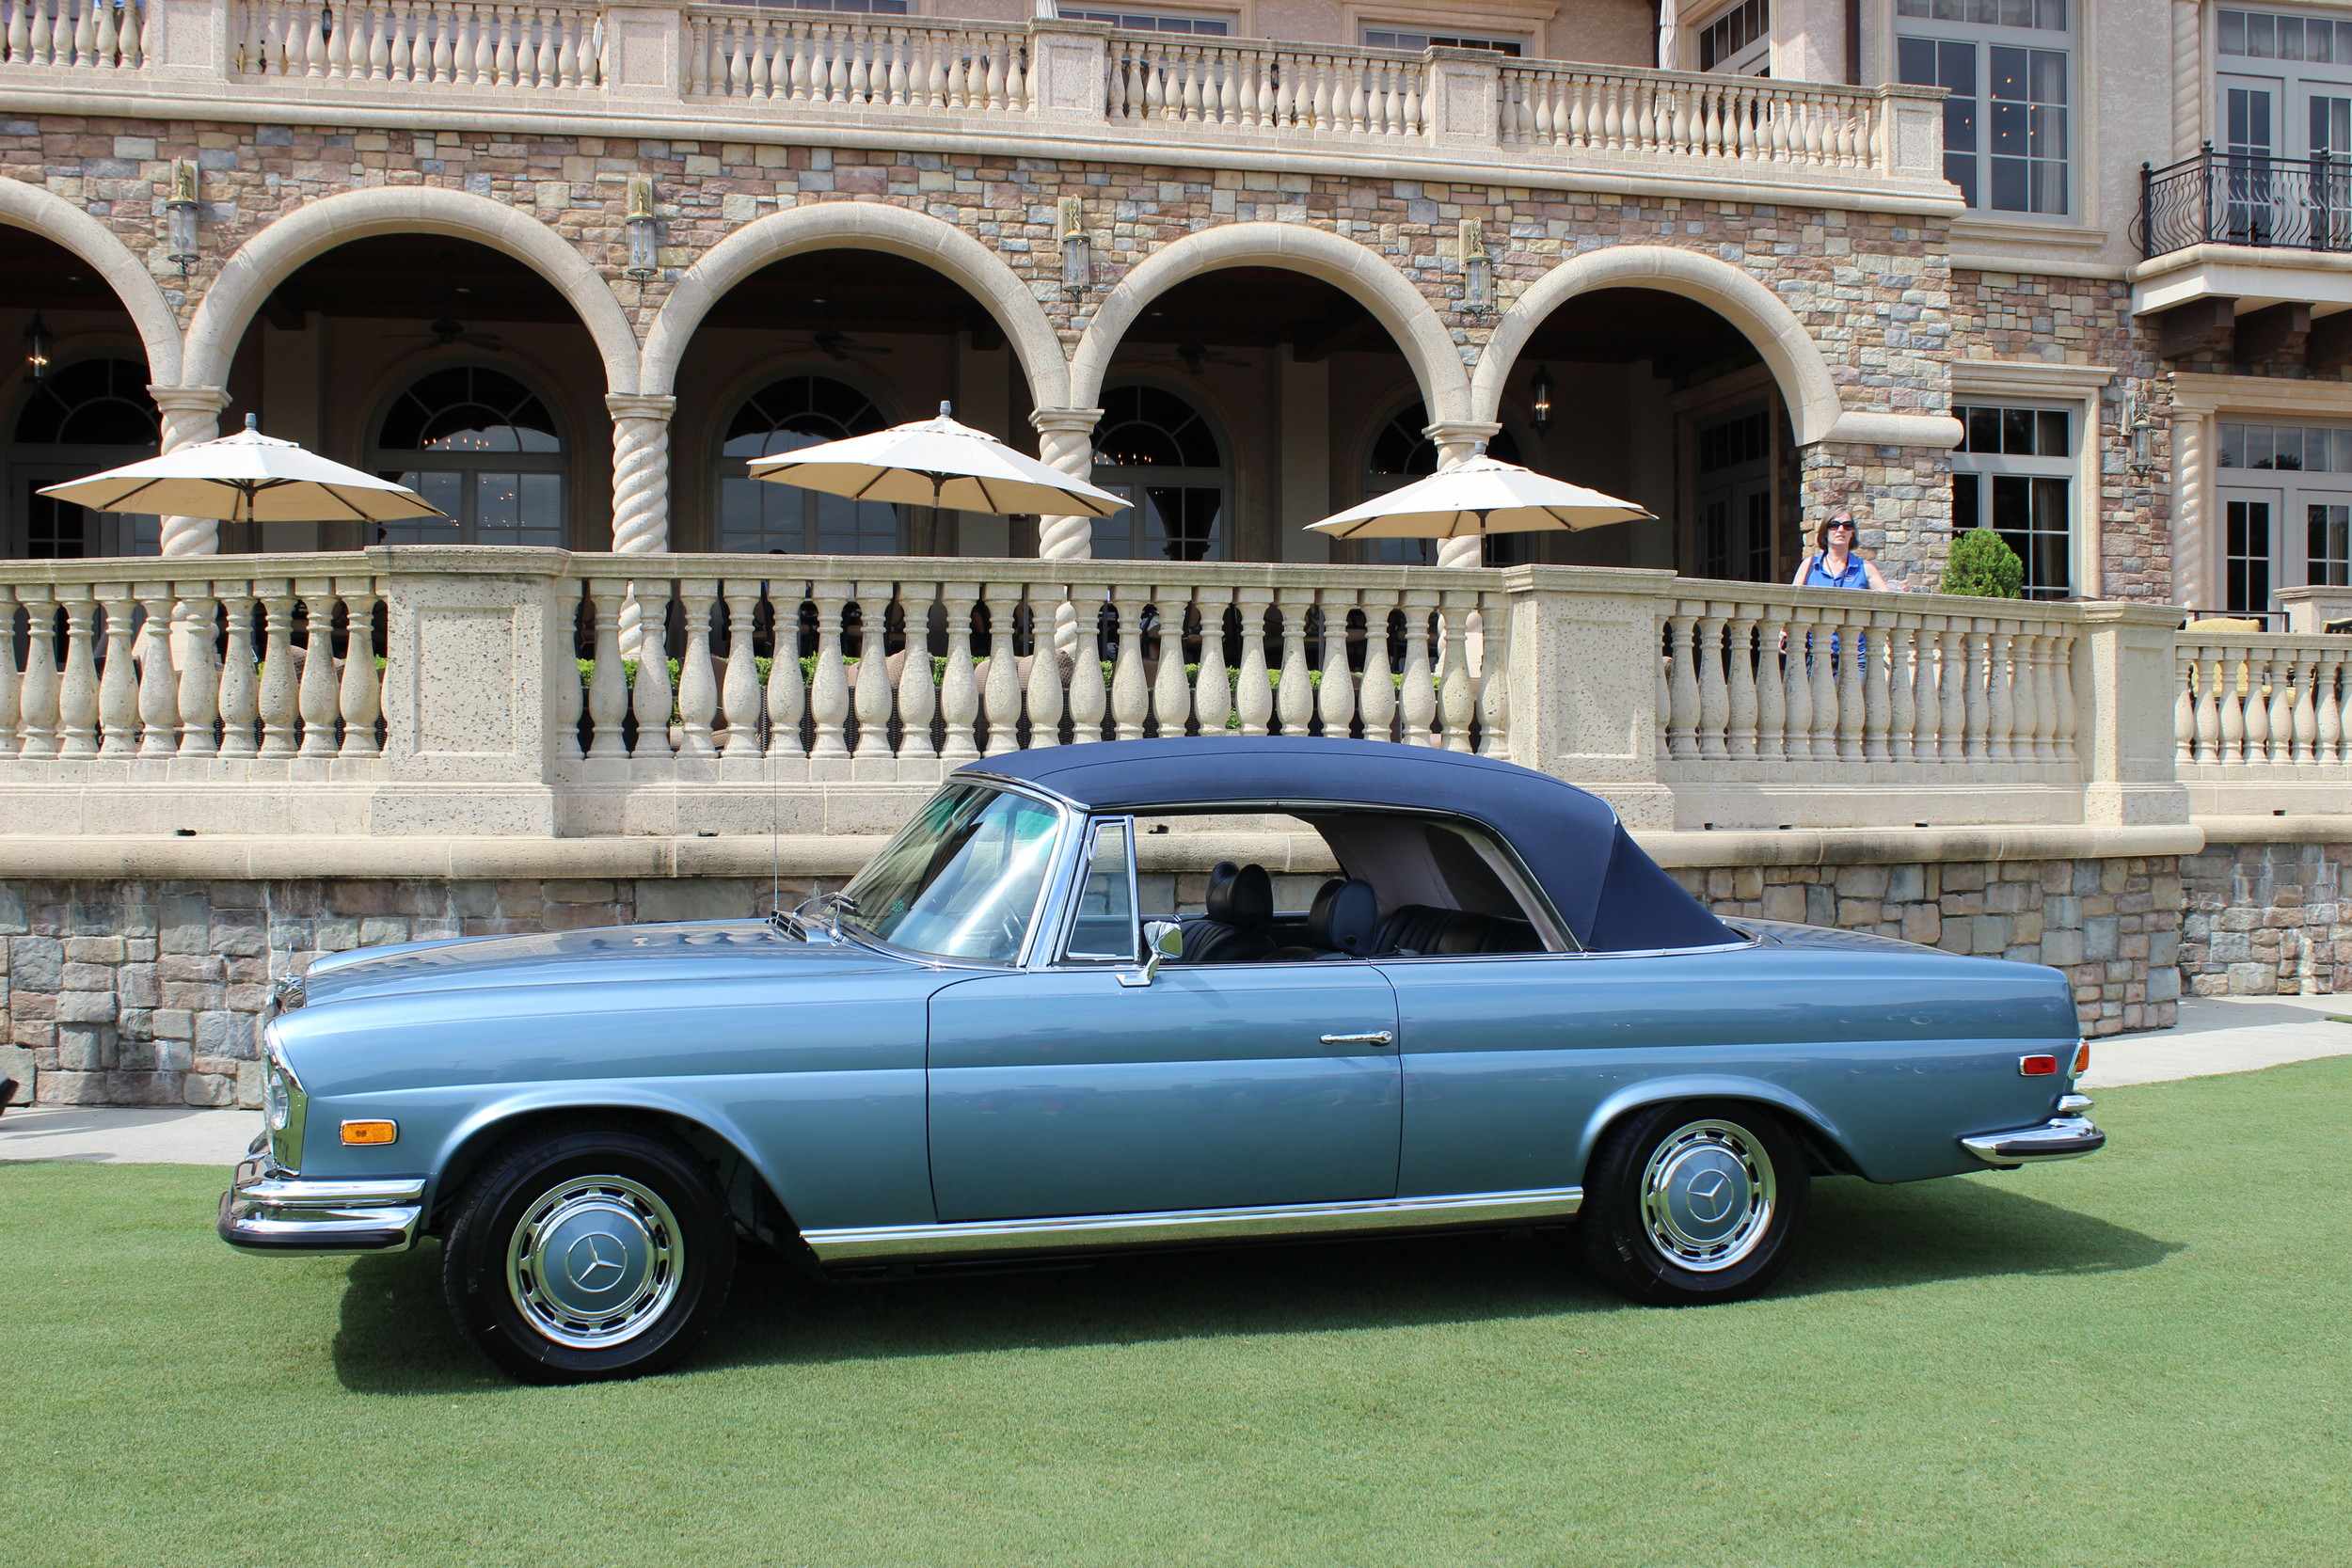 The Best in Show: a 1971 Mercedes Benz 3.5 Cabriolet